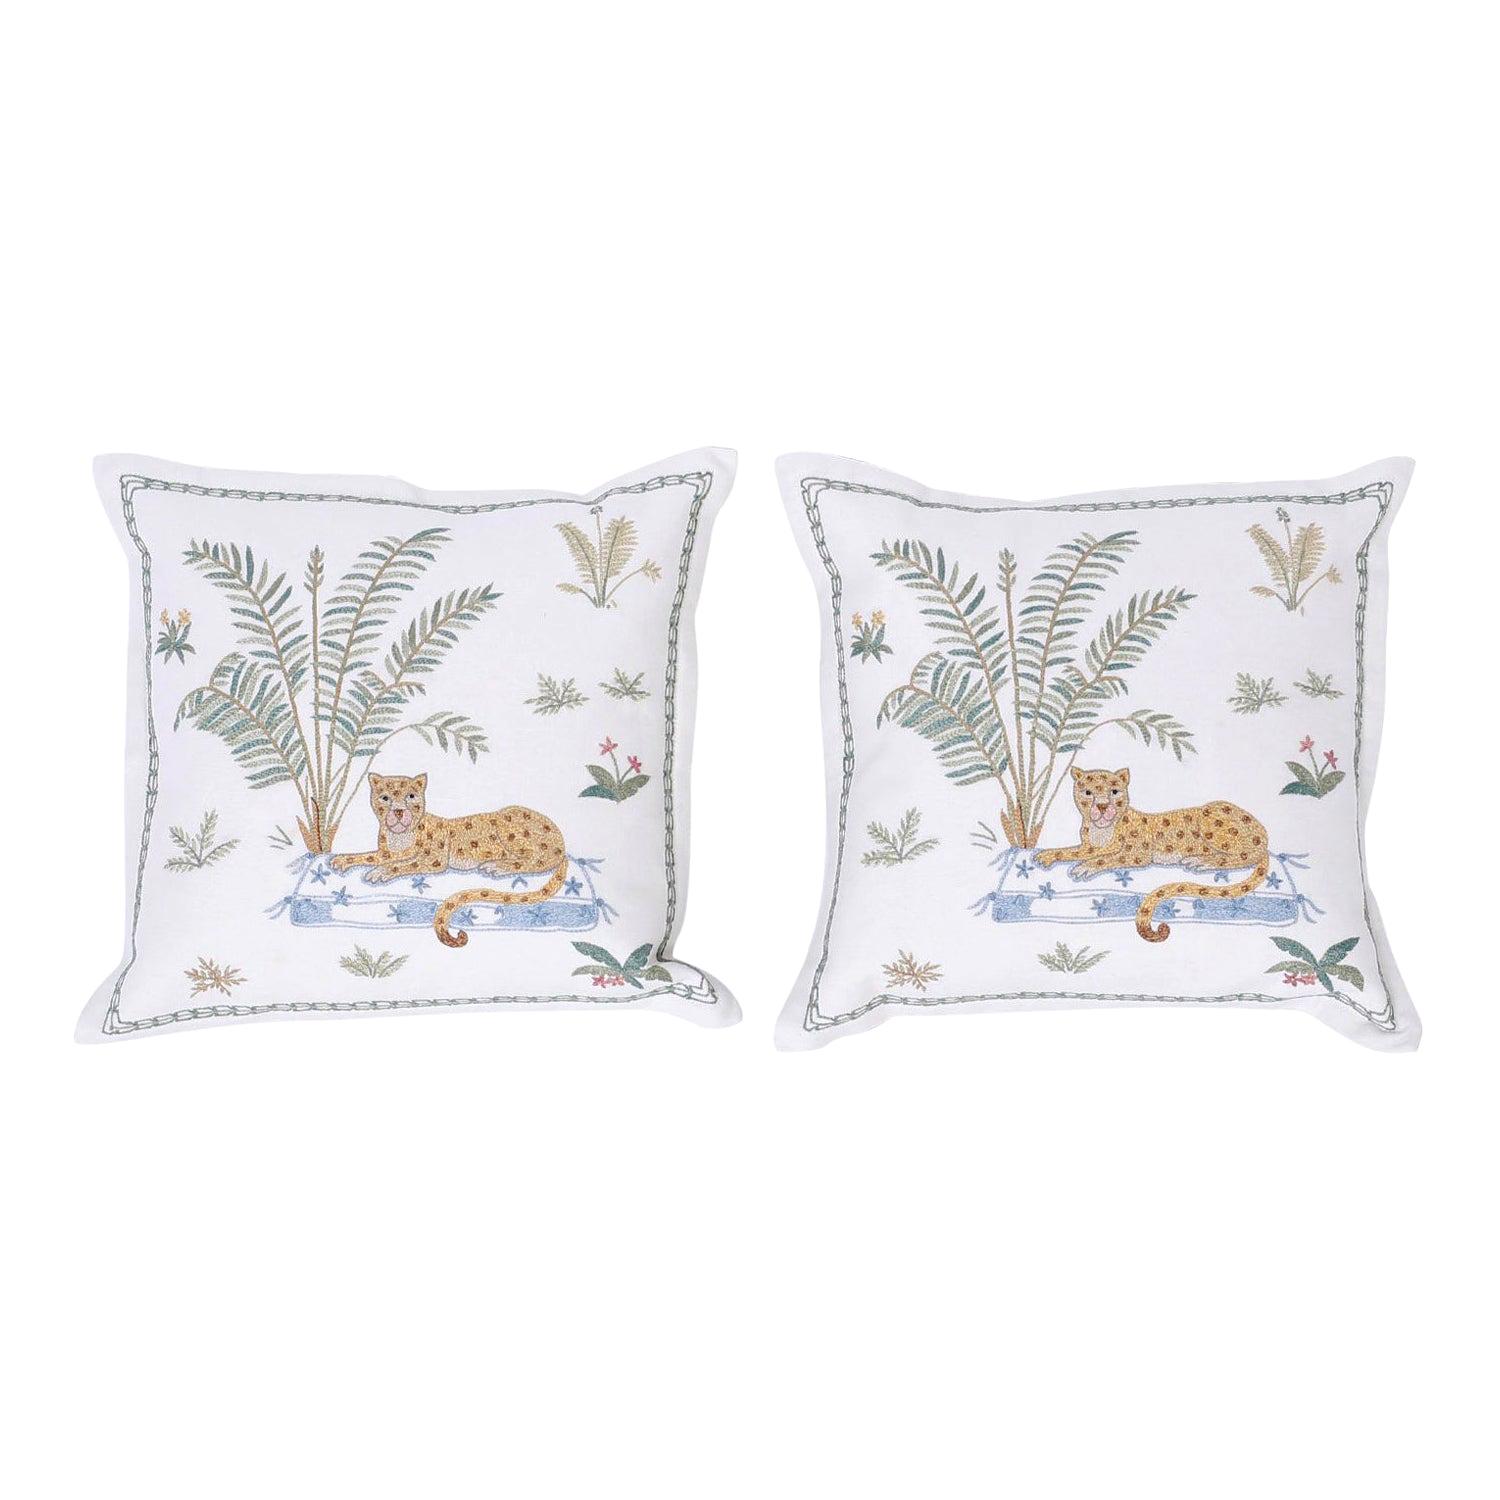 Tropical Crewelwork Cheetah Pillows, Priced Individually